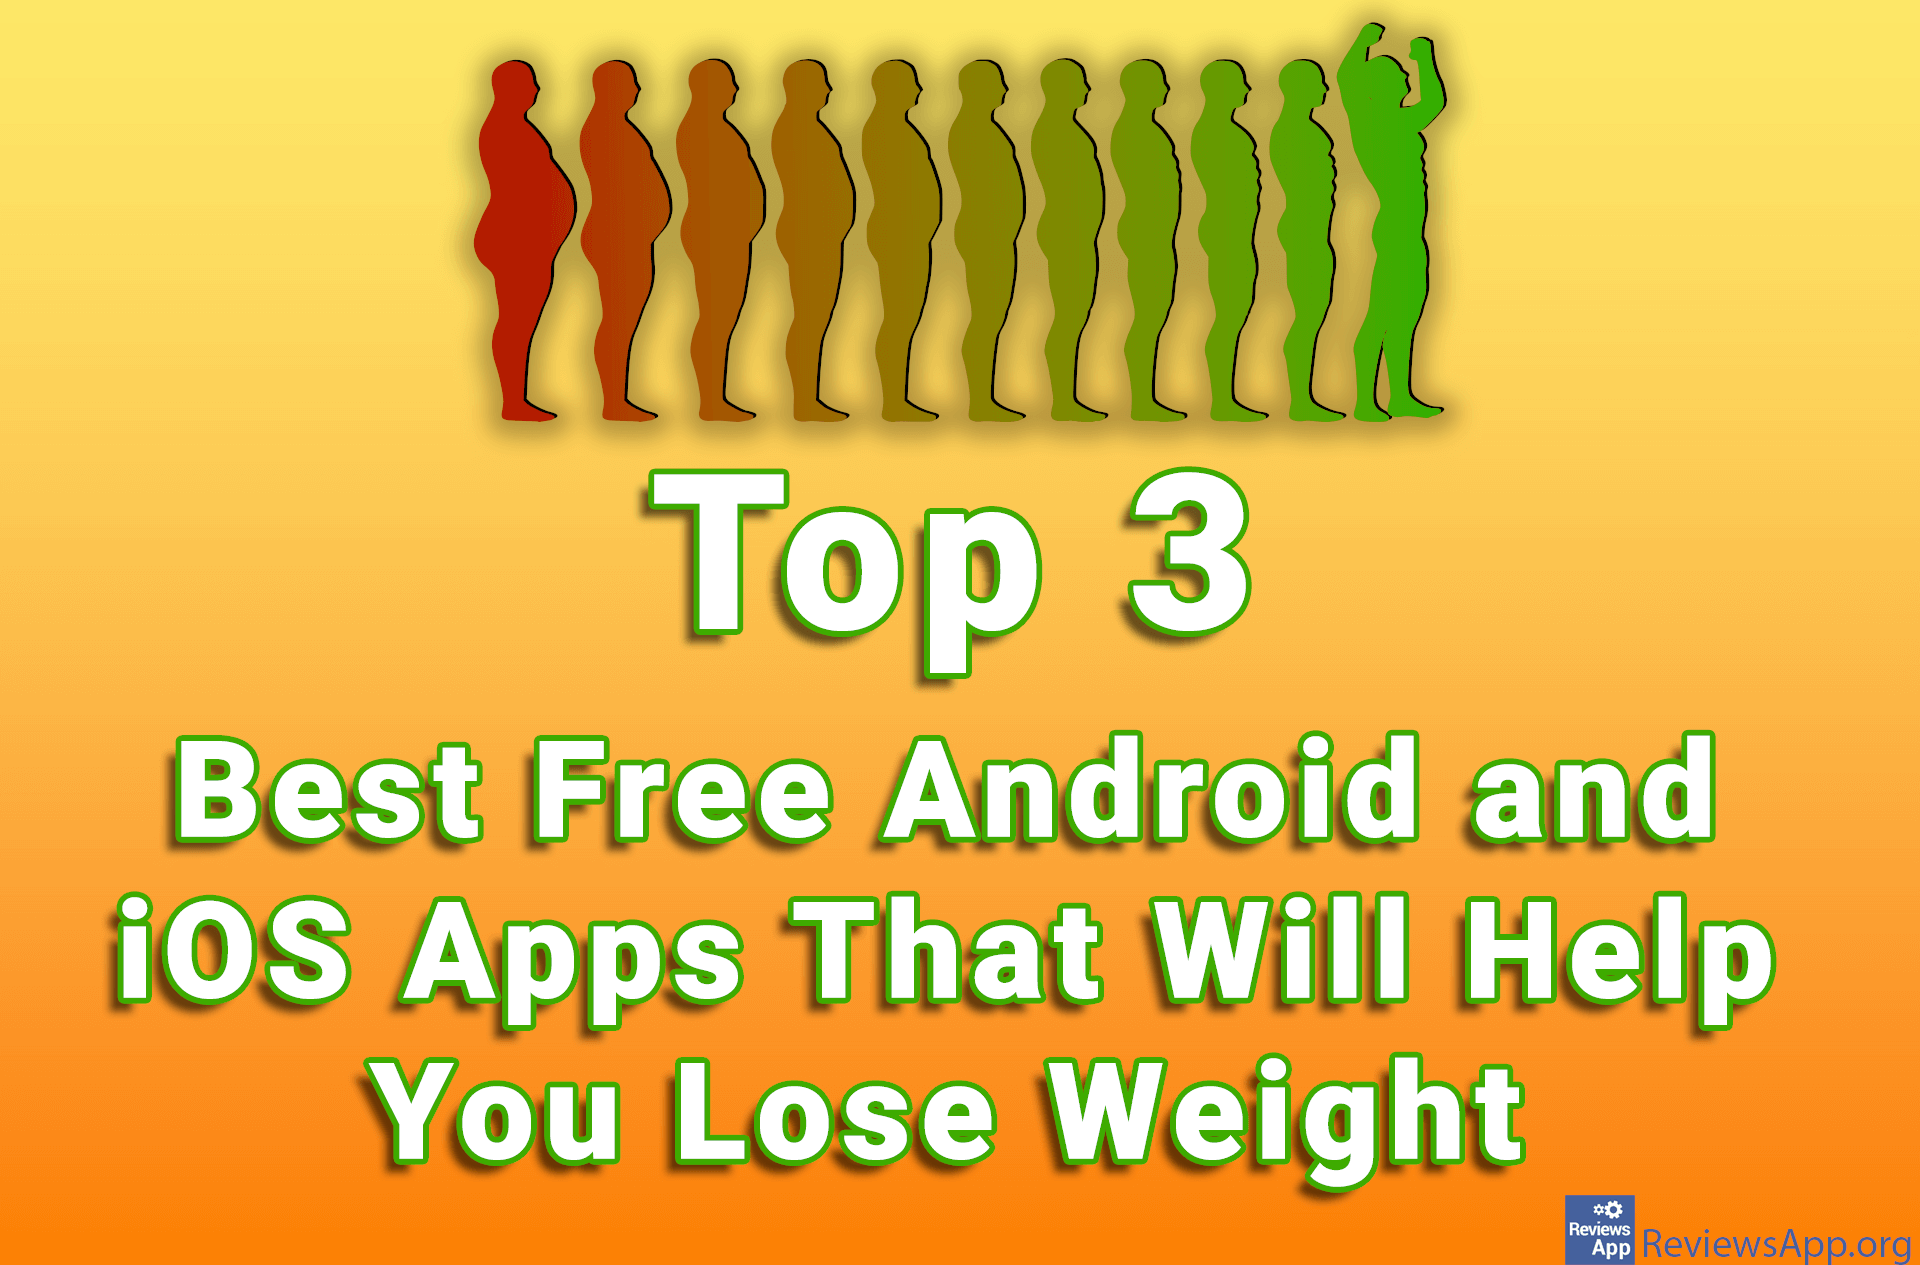 Top 3 Best Free Android and iOS Apps That Will Help You Lose Weight